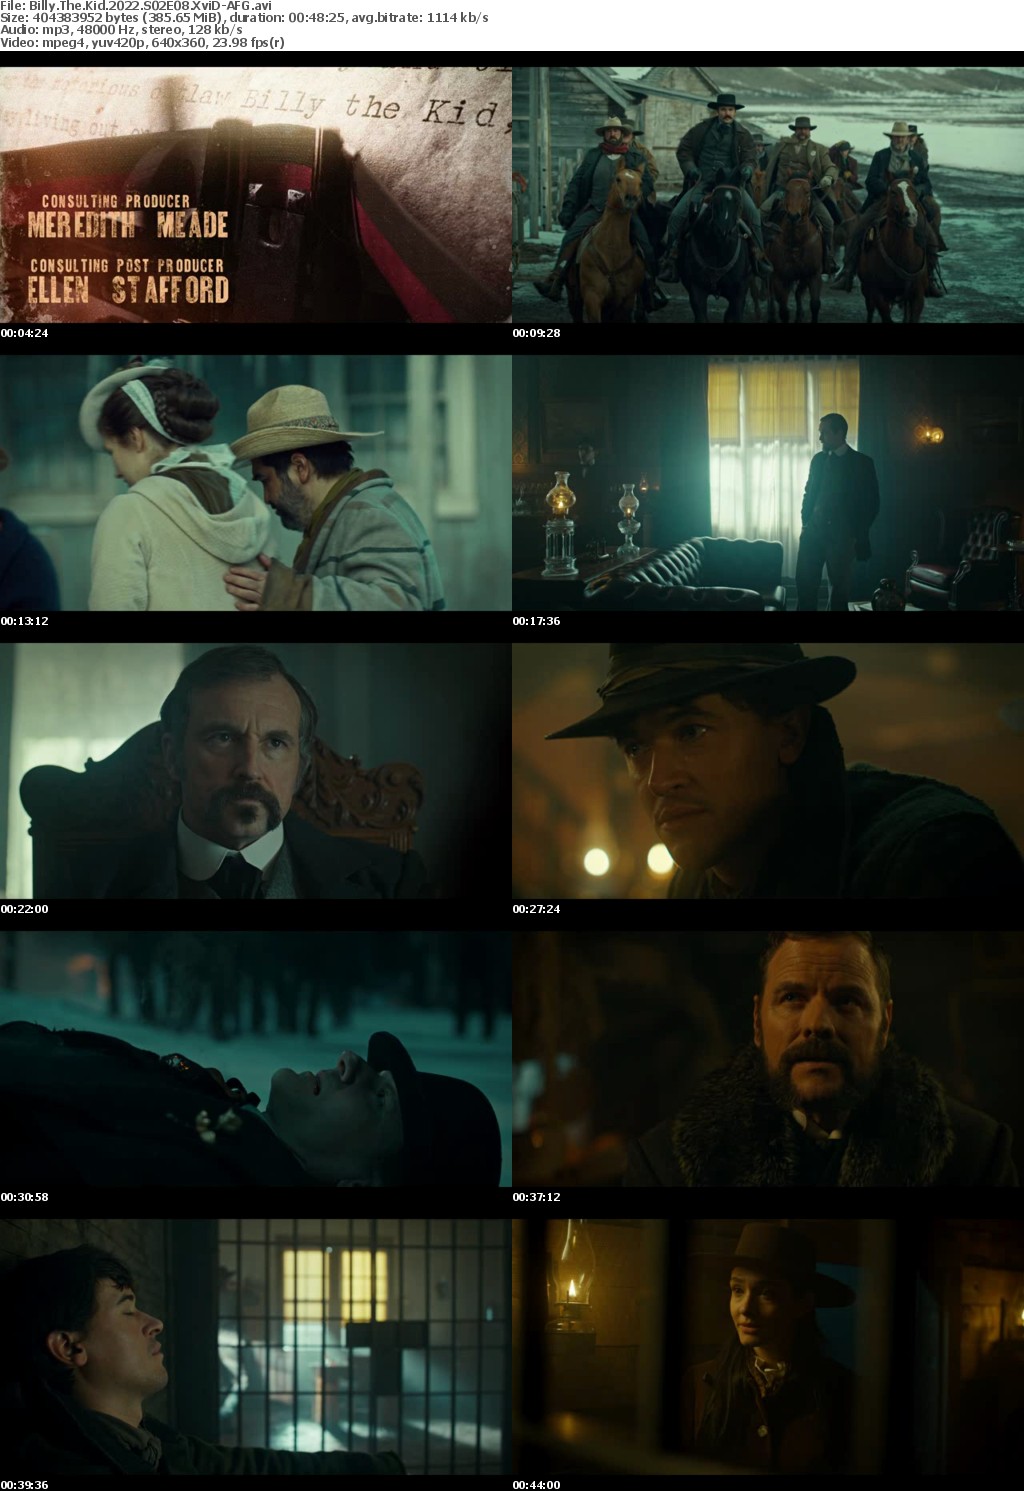 Billy The Kid 2022 S02E08 XviD-AFG